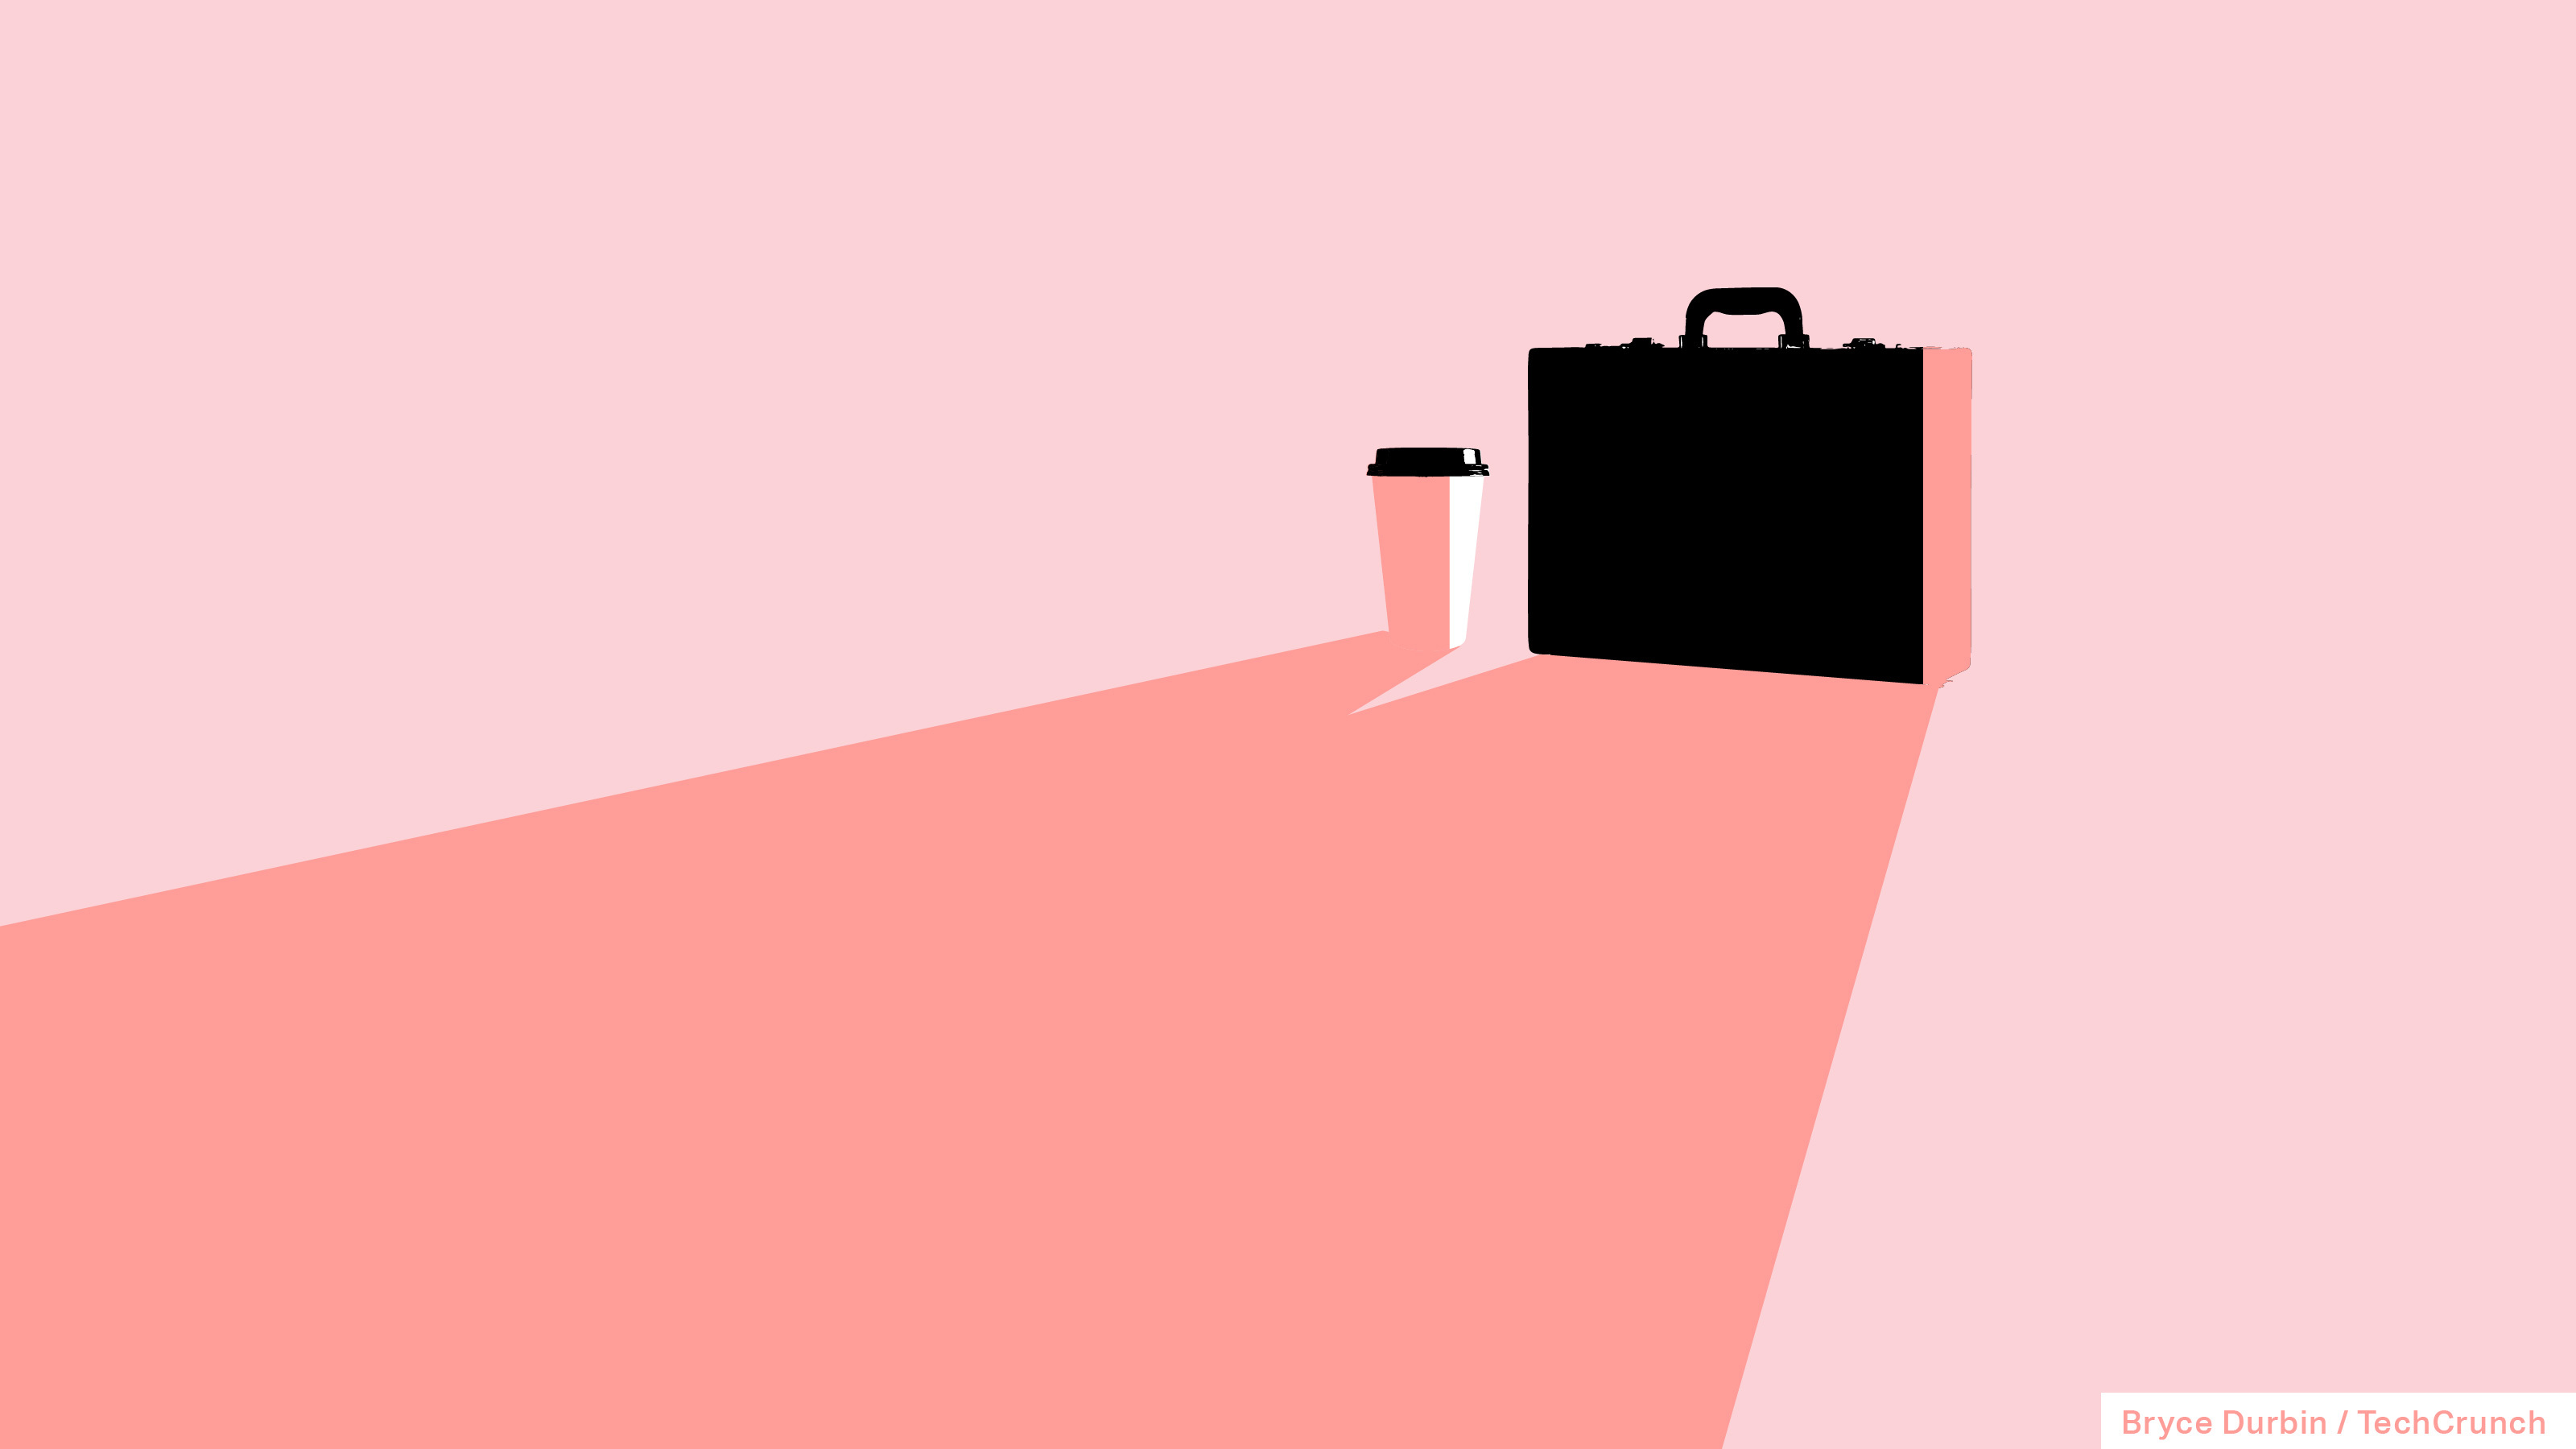 A cup of coffee and a briefcase in millennial pink to depict the rise of the 